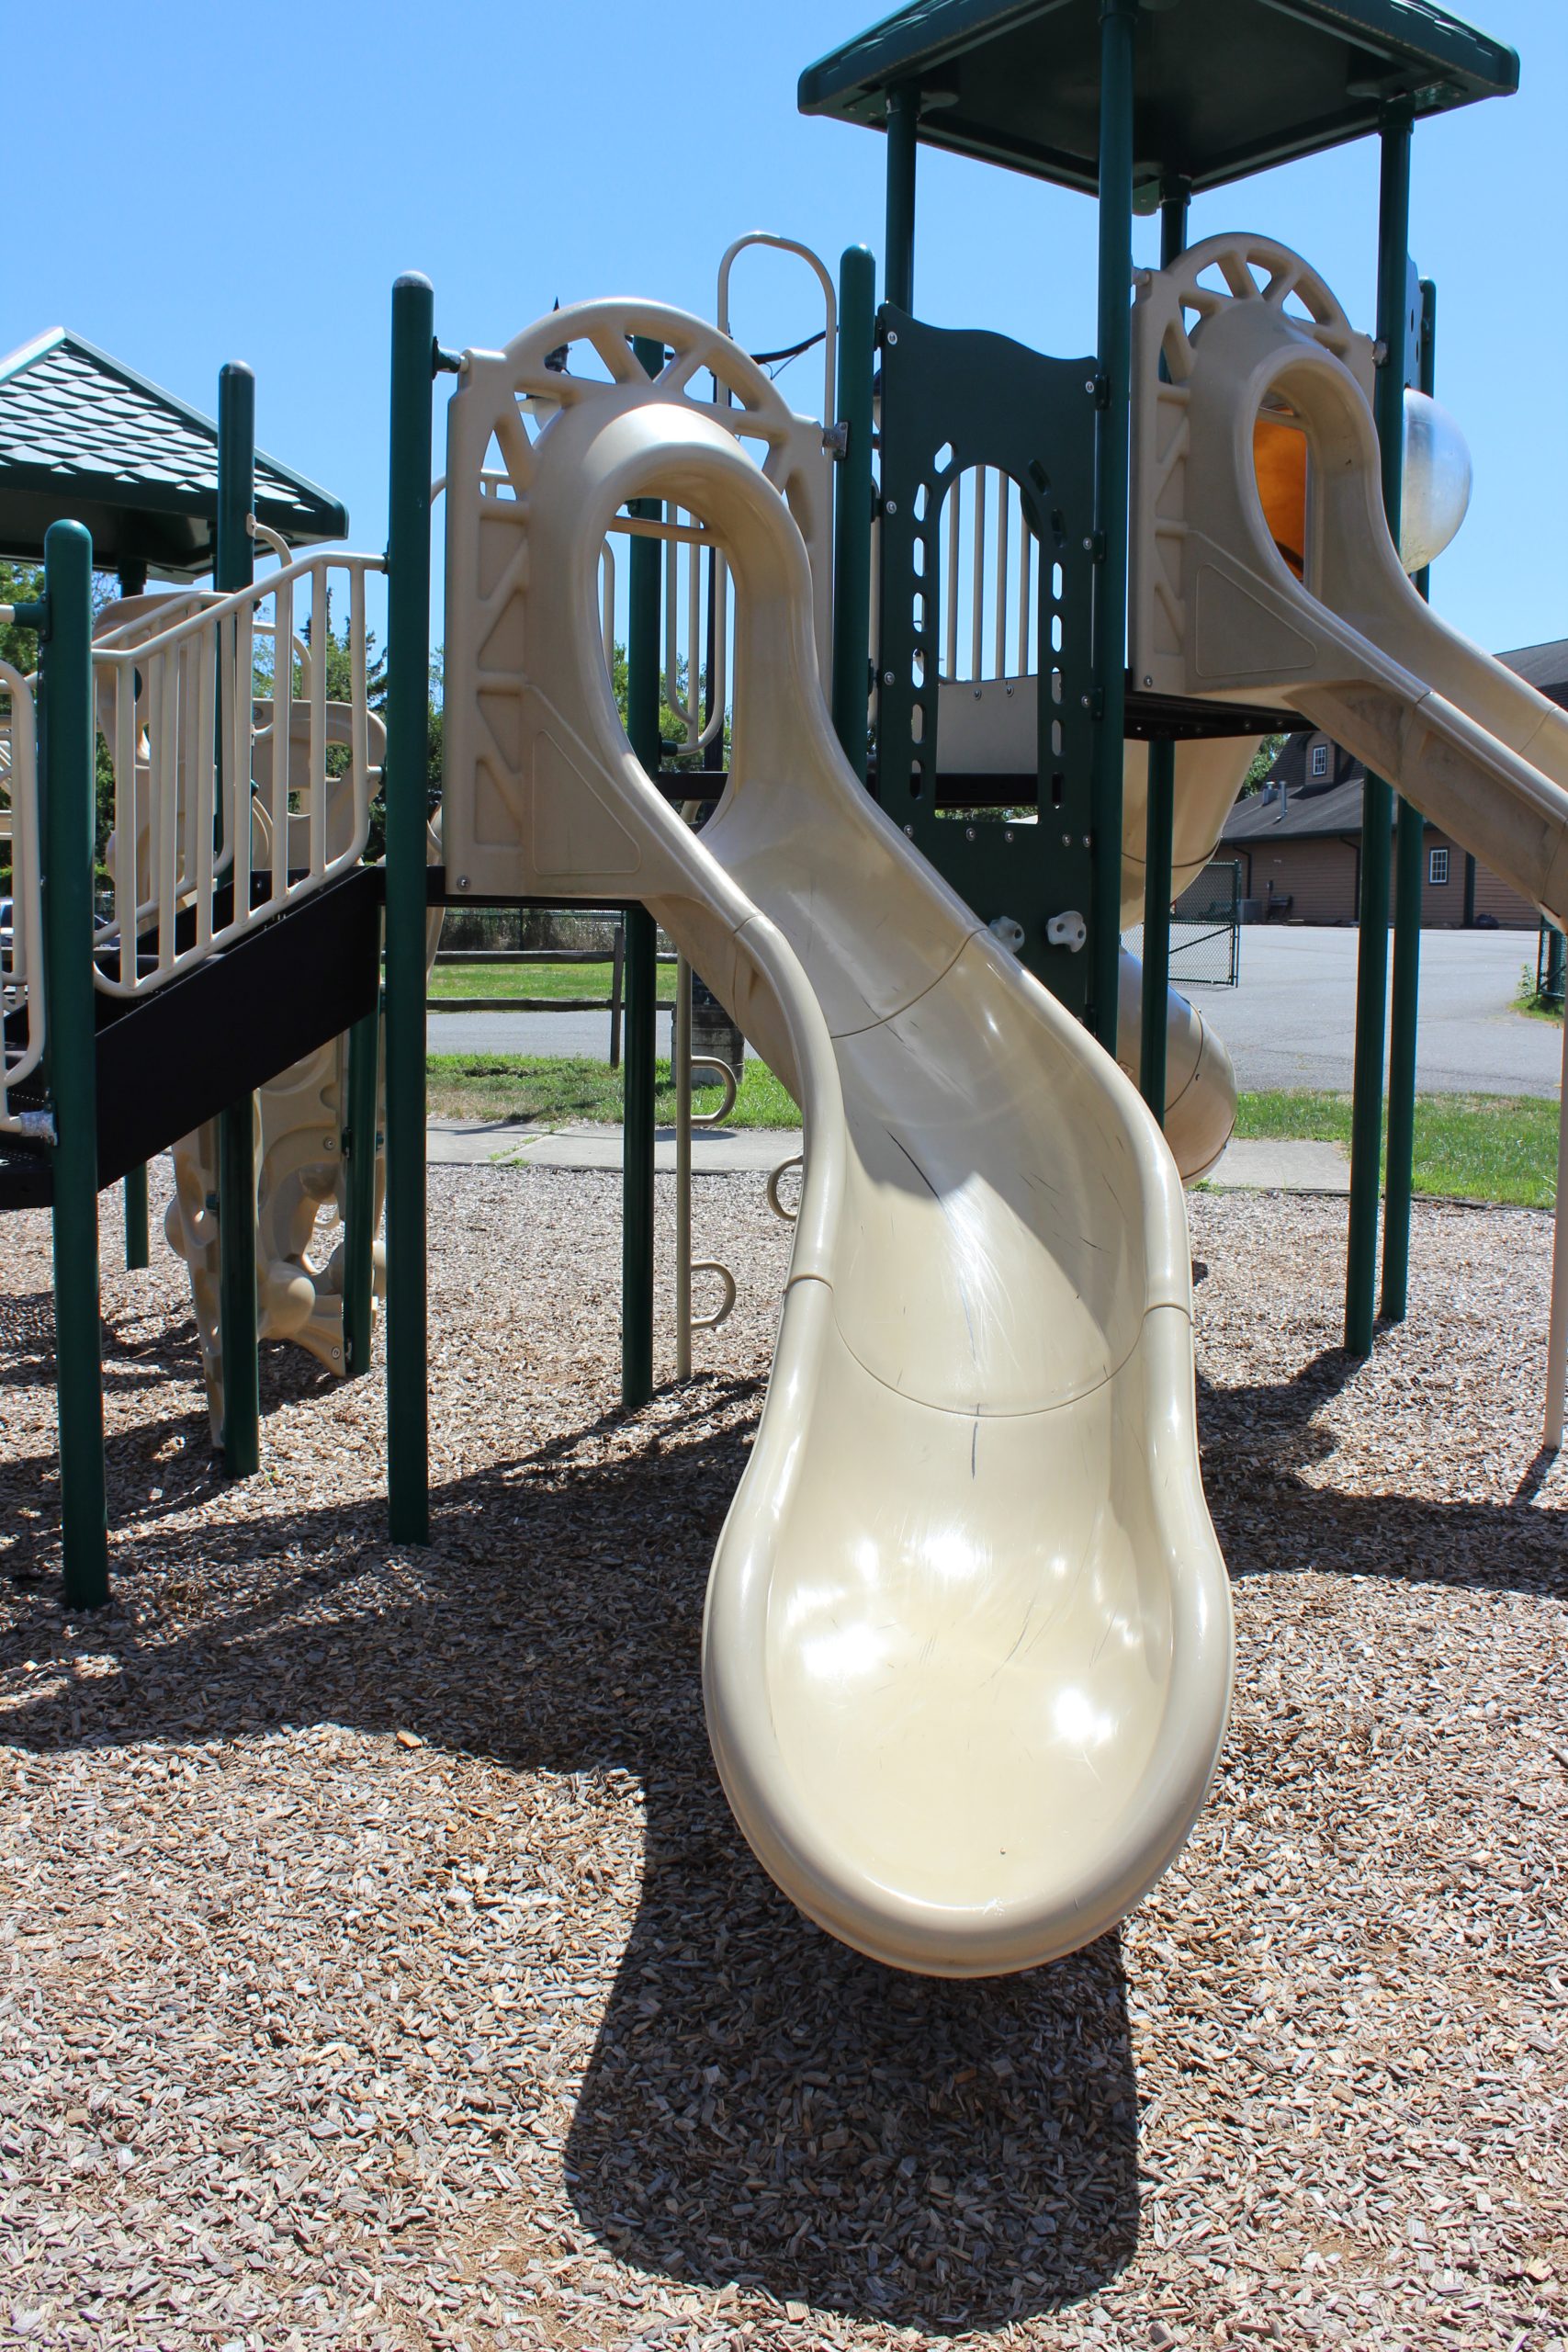 SLIDE - open and slightly curvy slide TALL image at Stanley Tip Seaman Park Playground in Tuckerton NJ